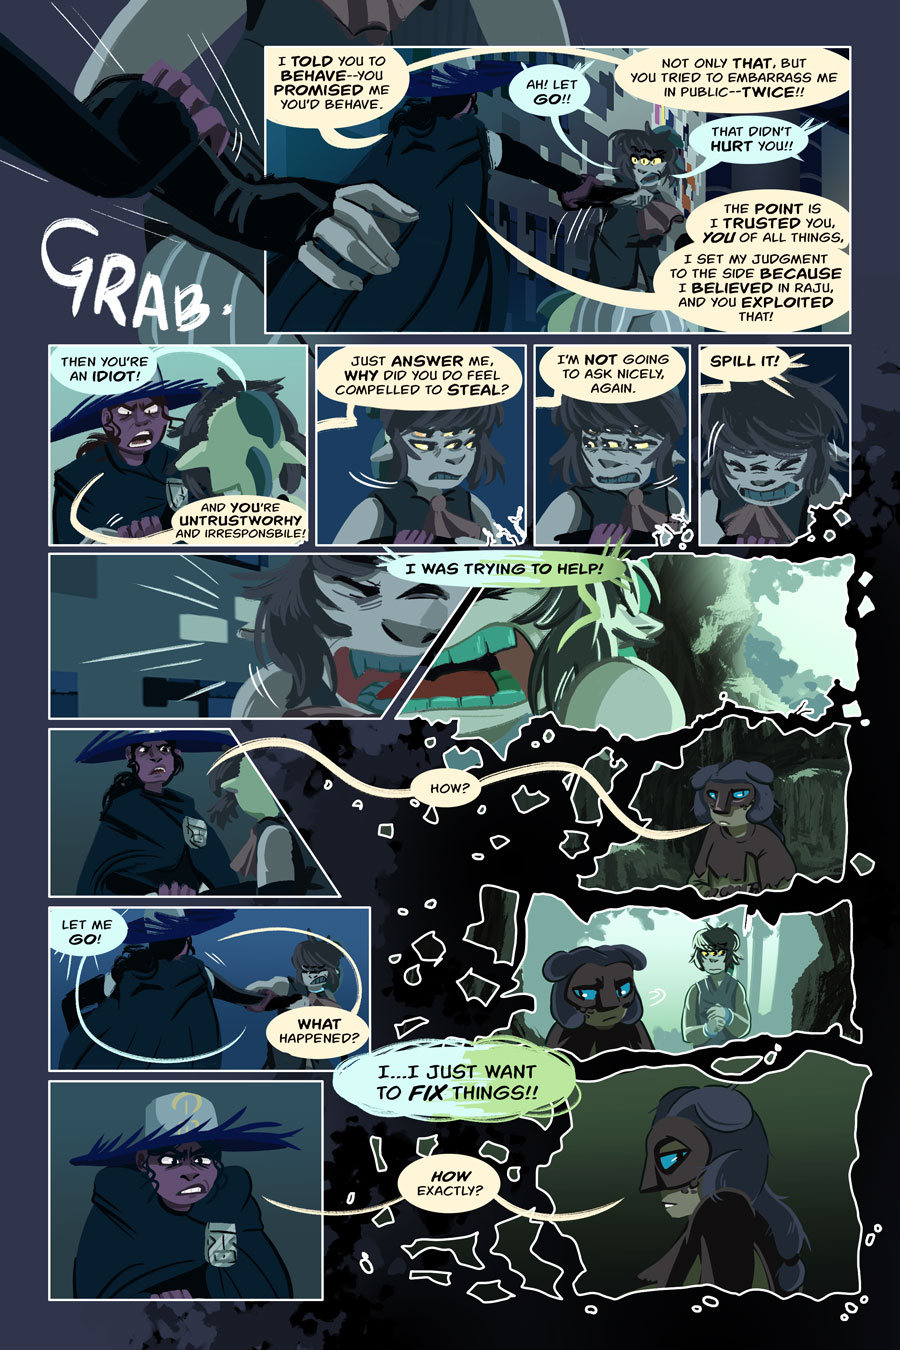 Chapter 8, page 37